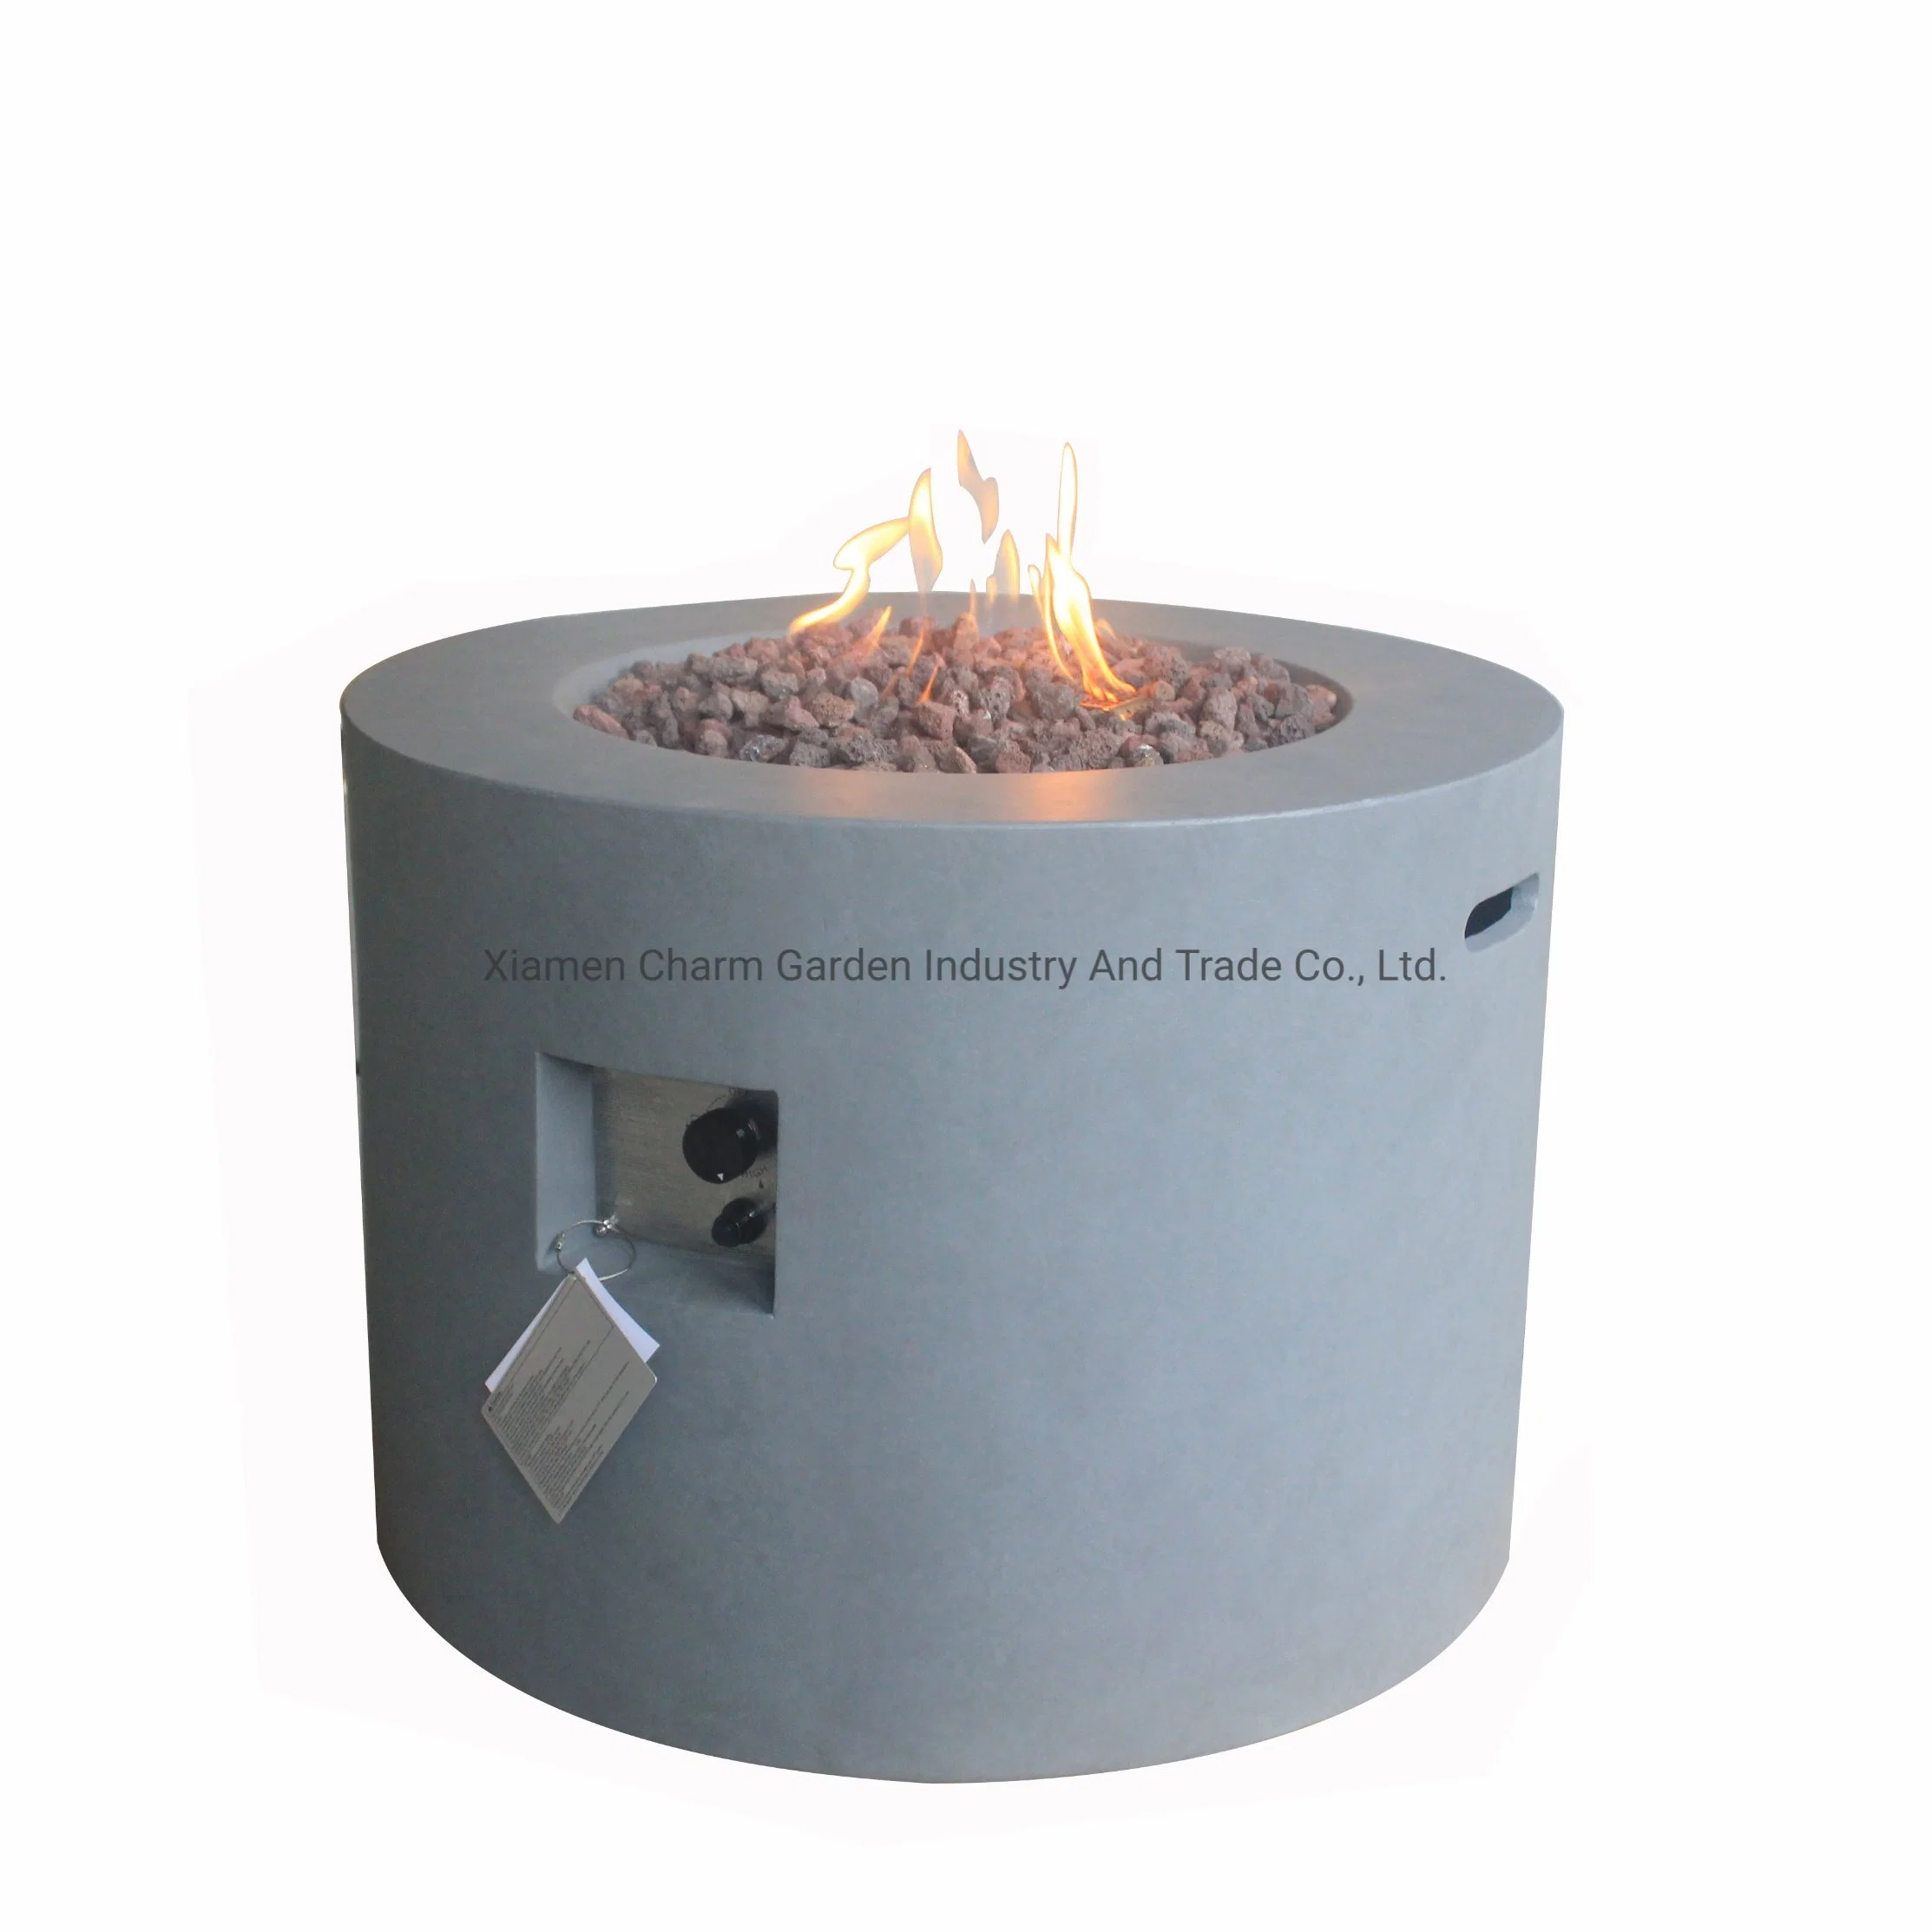 31 Inch Round LPG Certificated Fire Table Gas Tank Fit Inside Fire Pits Outdoor Heater Backyrard Furniture